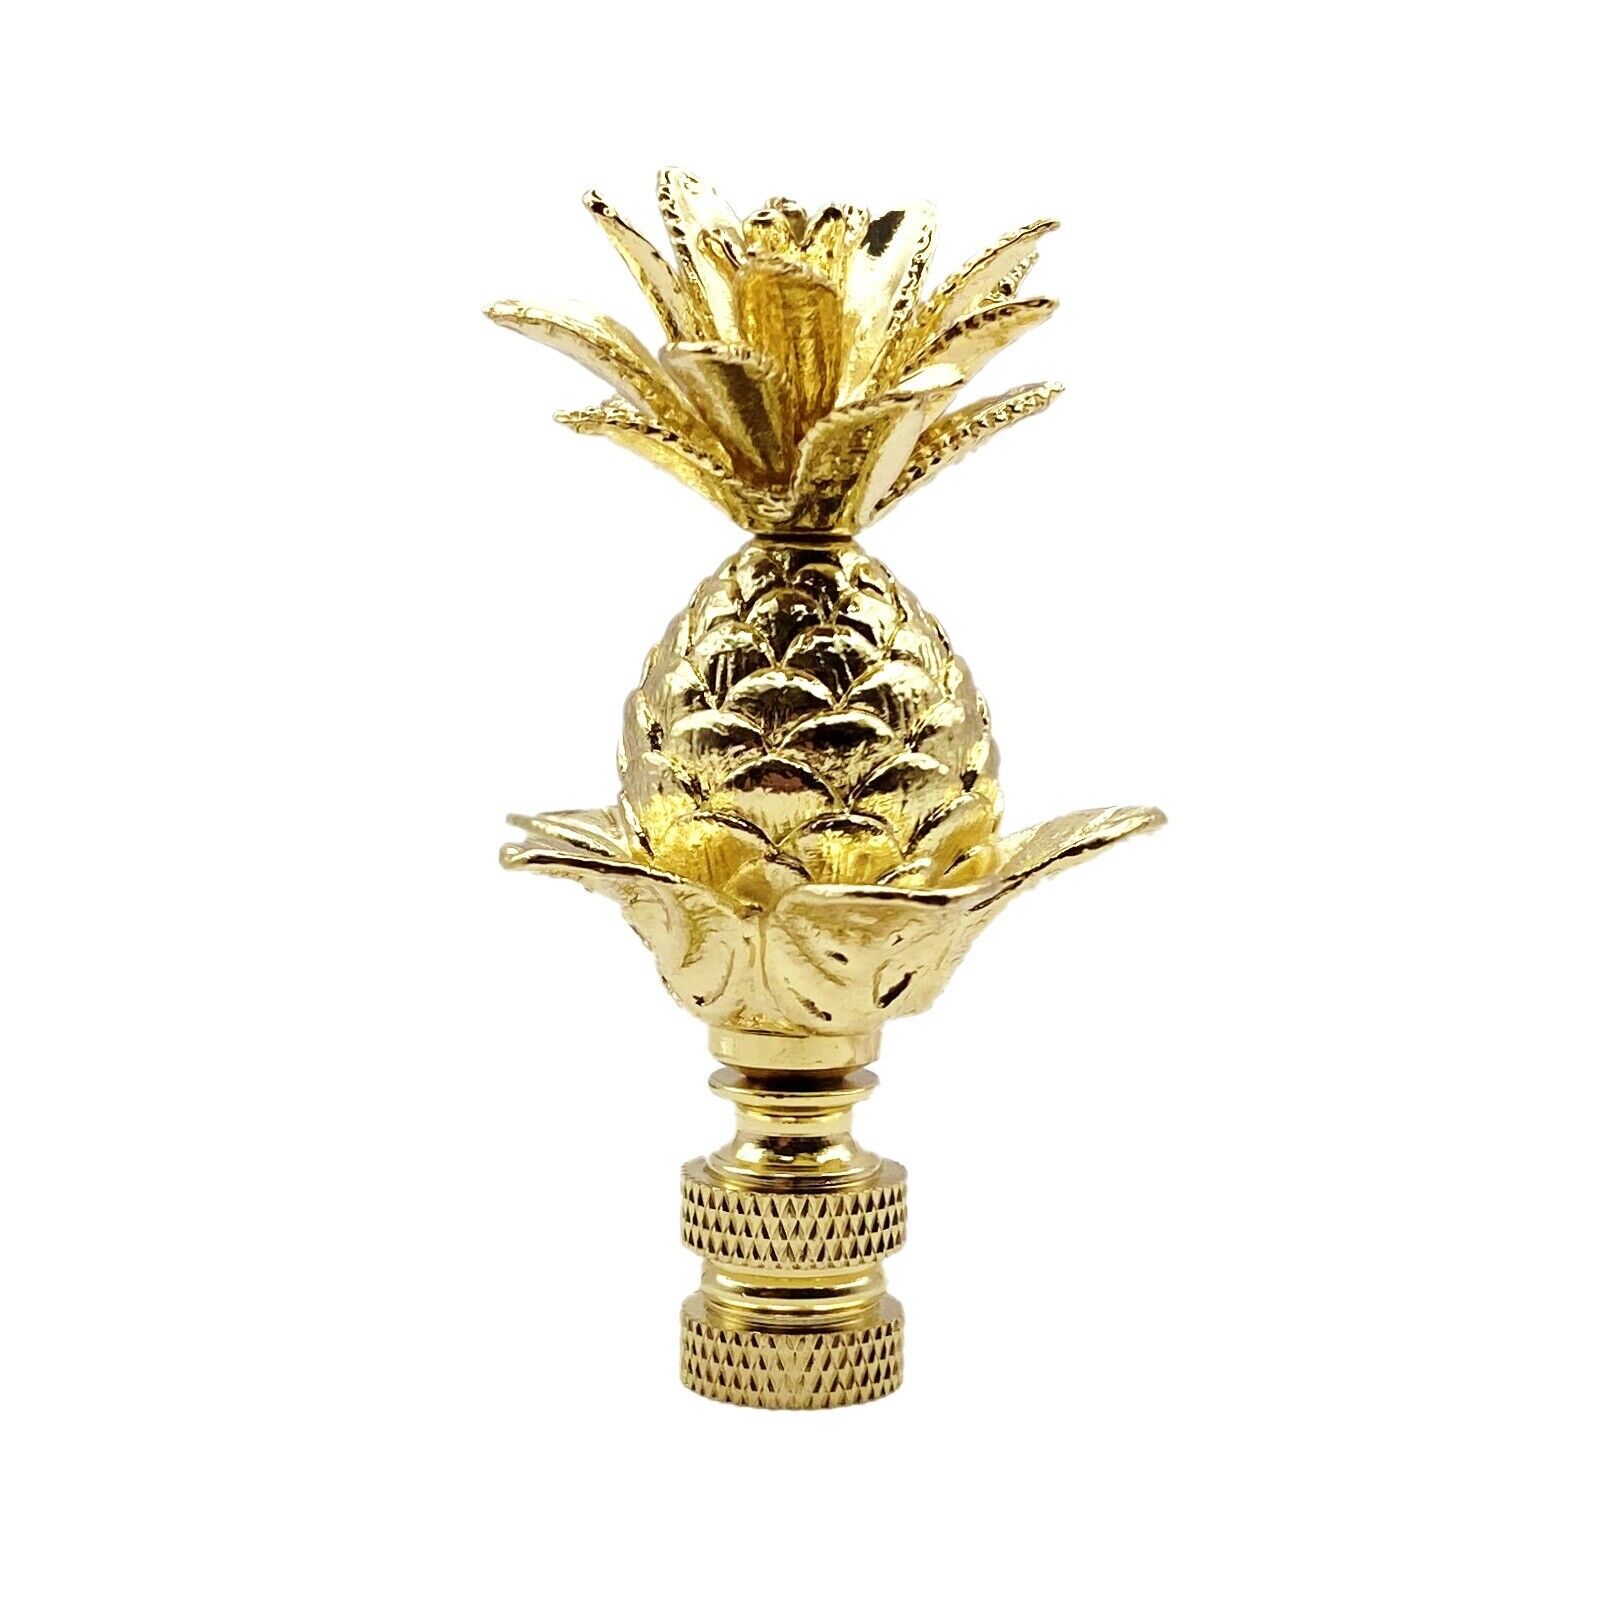 Lamp Finial-LARGE PINEAPPLE-Polished Brass Finish, Highly detailed metal casting